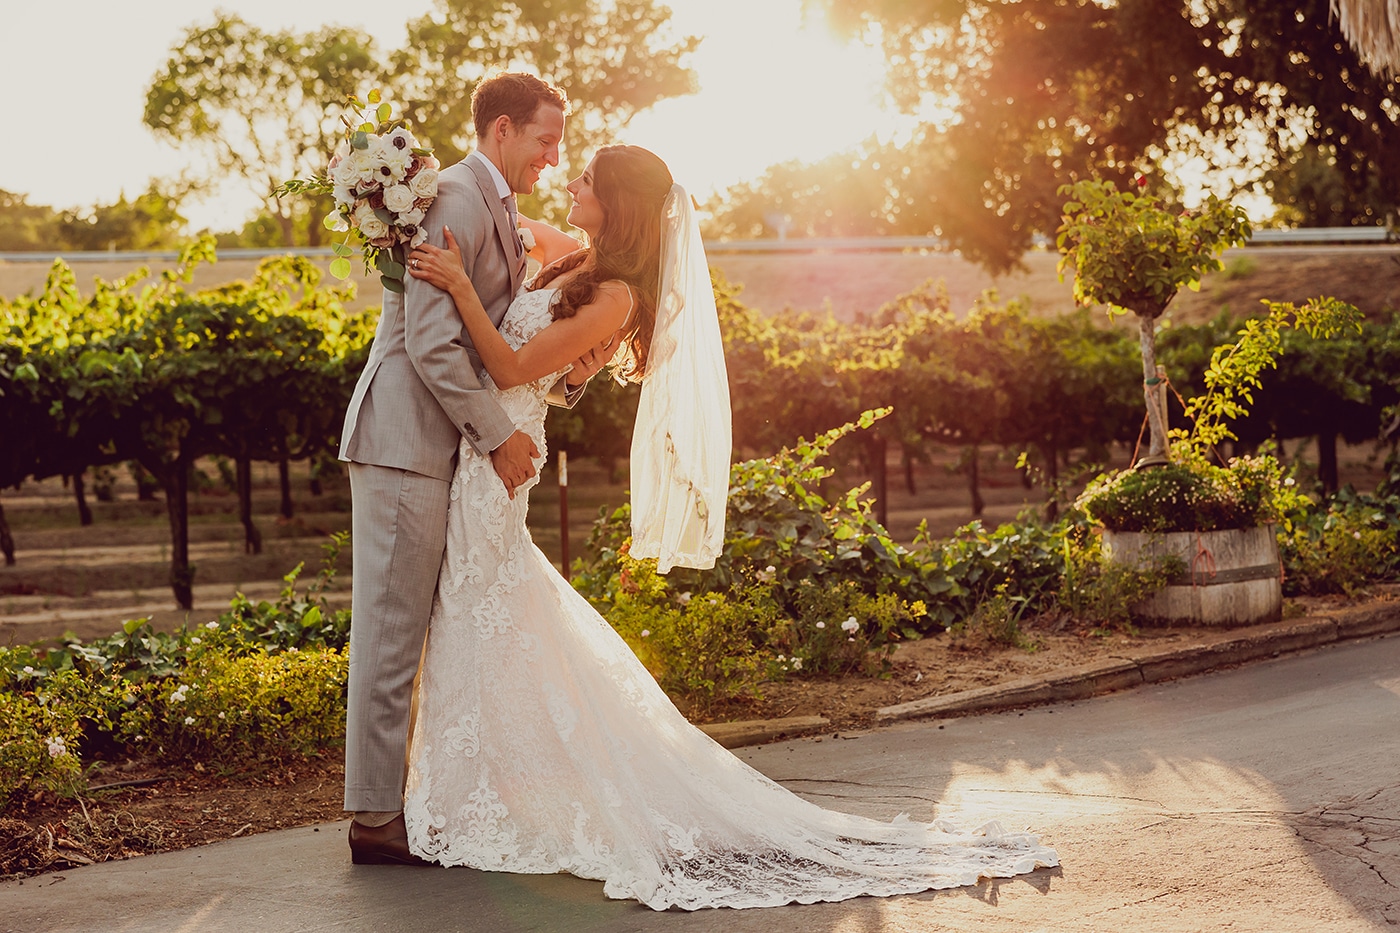 Groom in grey suit holds his bride at sunset with Sacramento grape vines in the background.